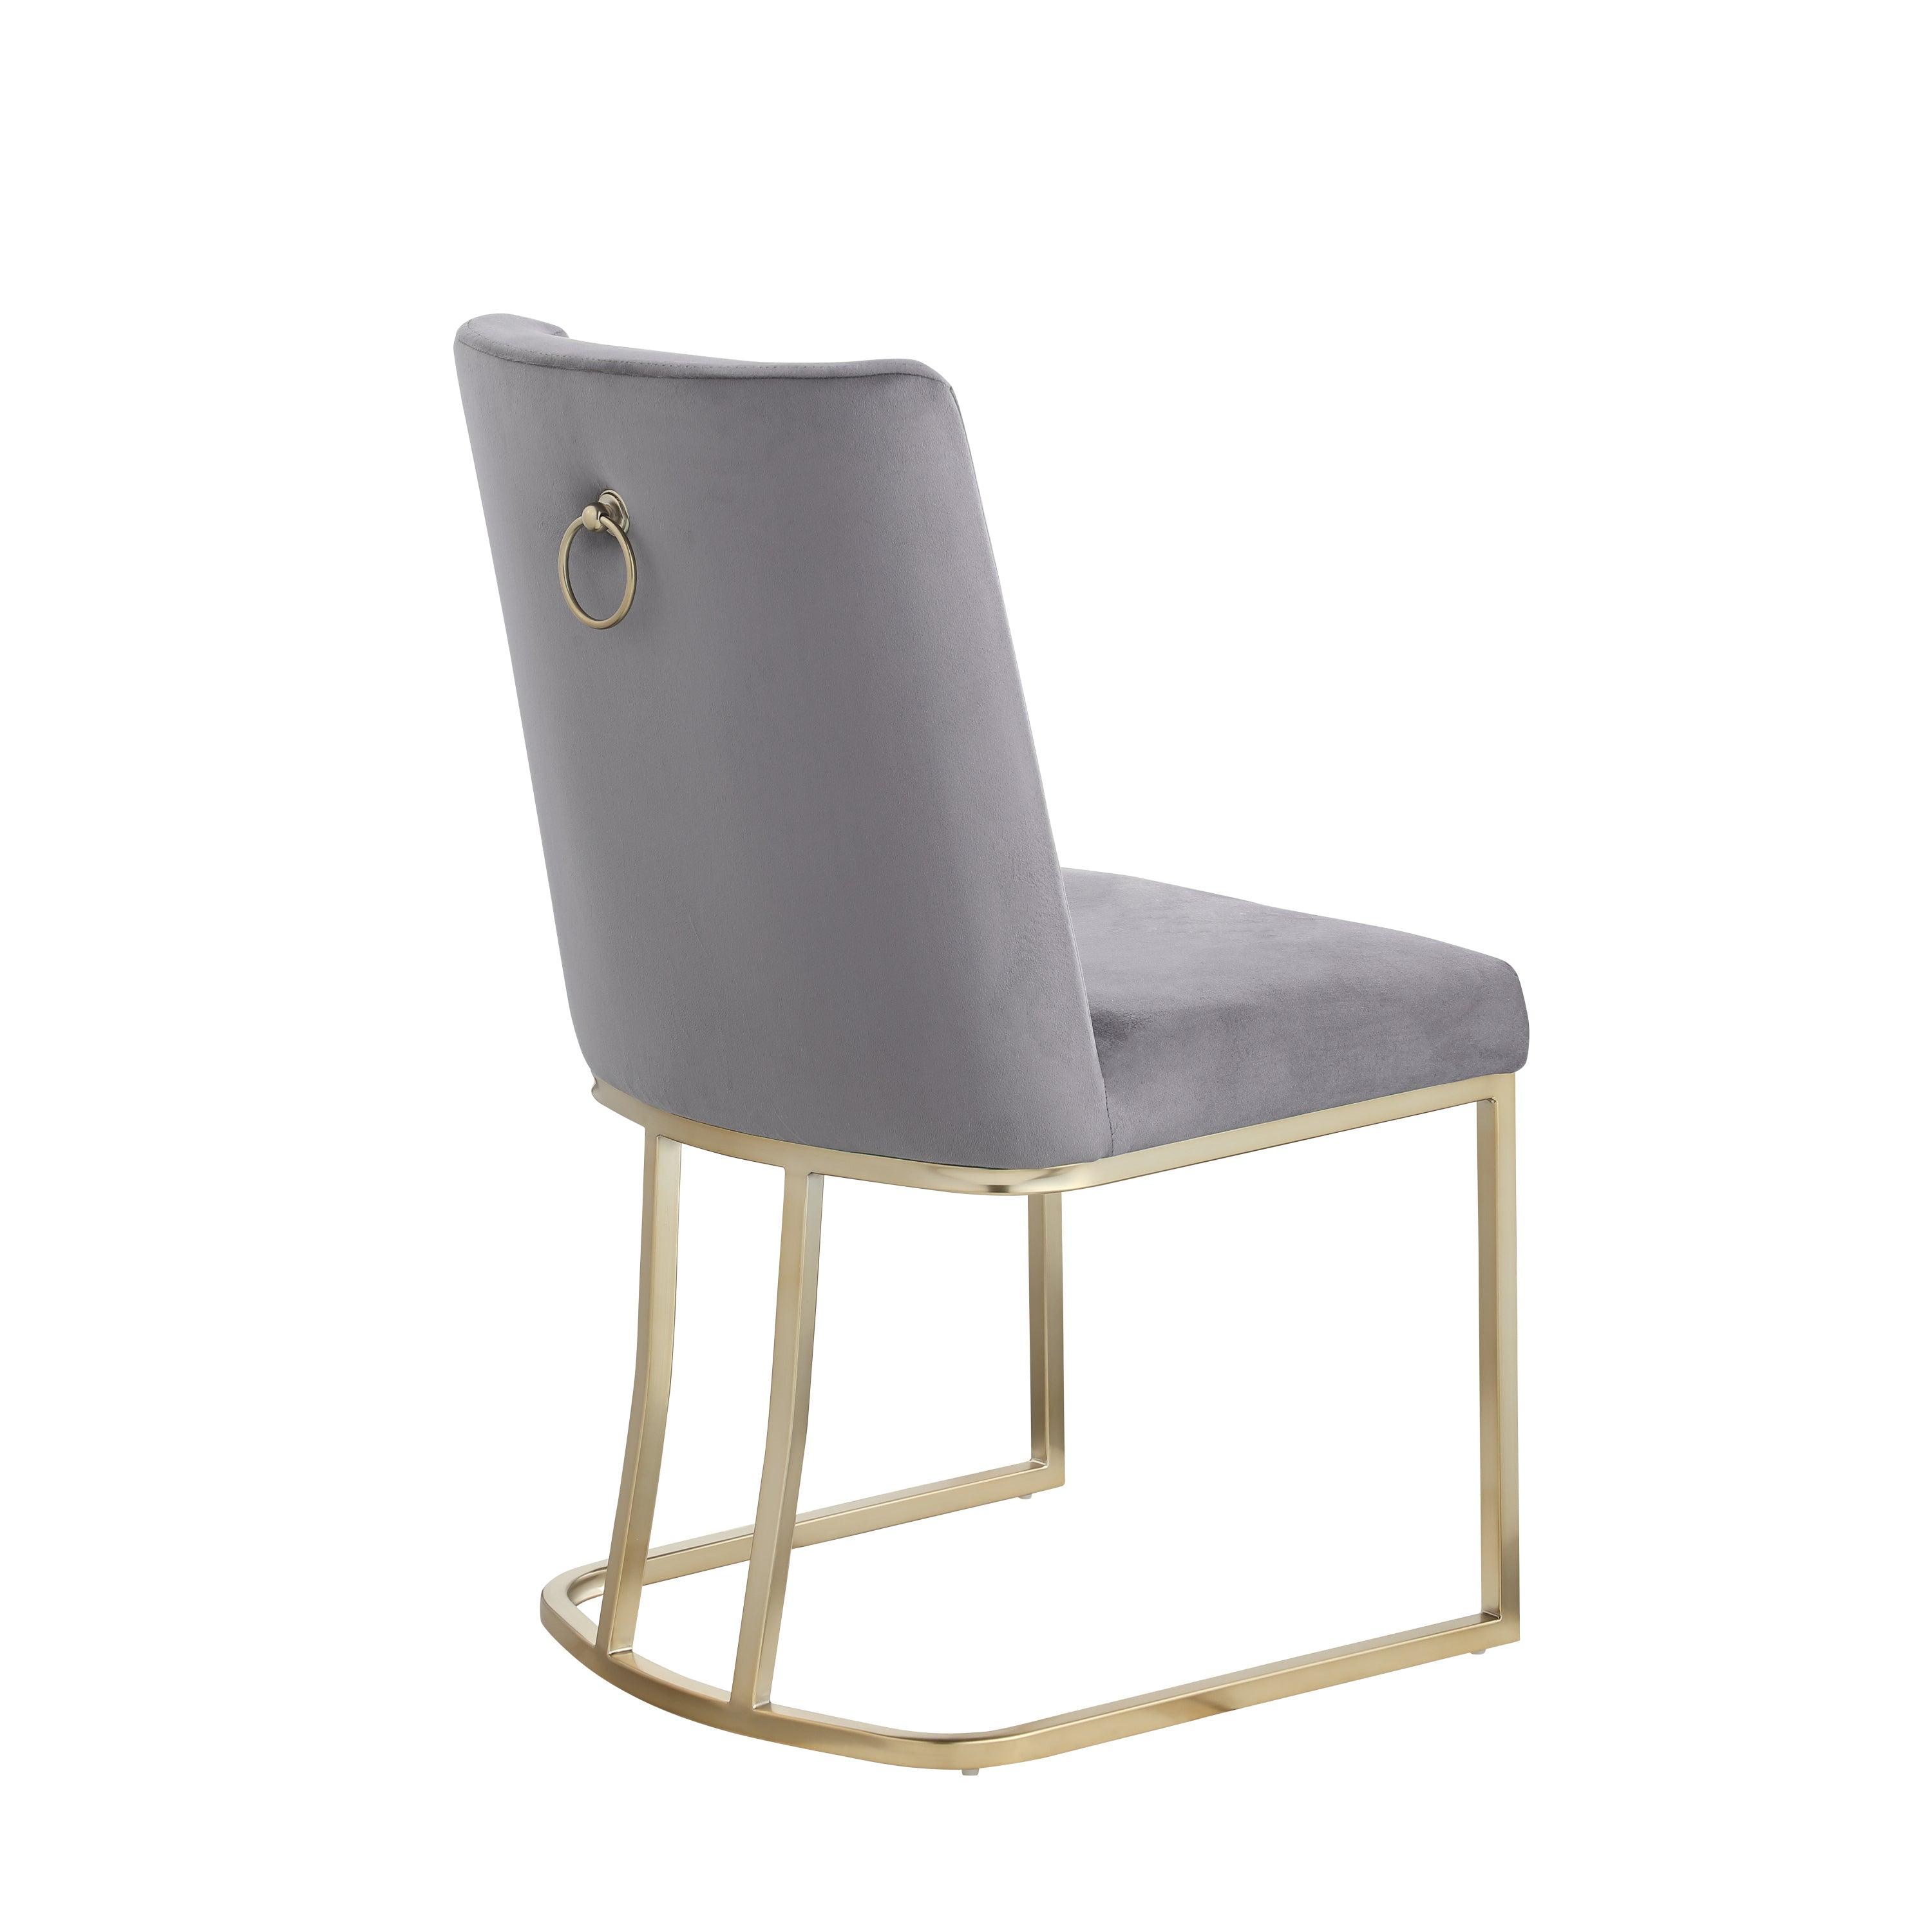 Dining Chairs, Velvet Upolstered Side Chair, Gold Metal Legs (Set of 2) - Gray